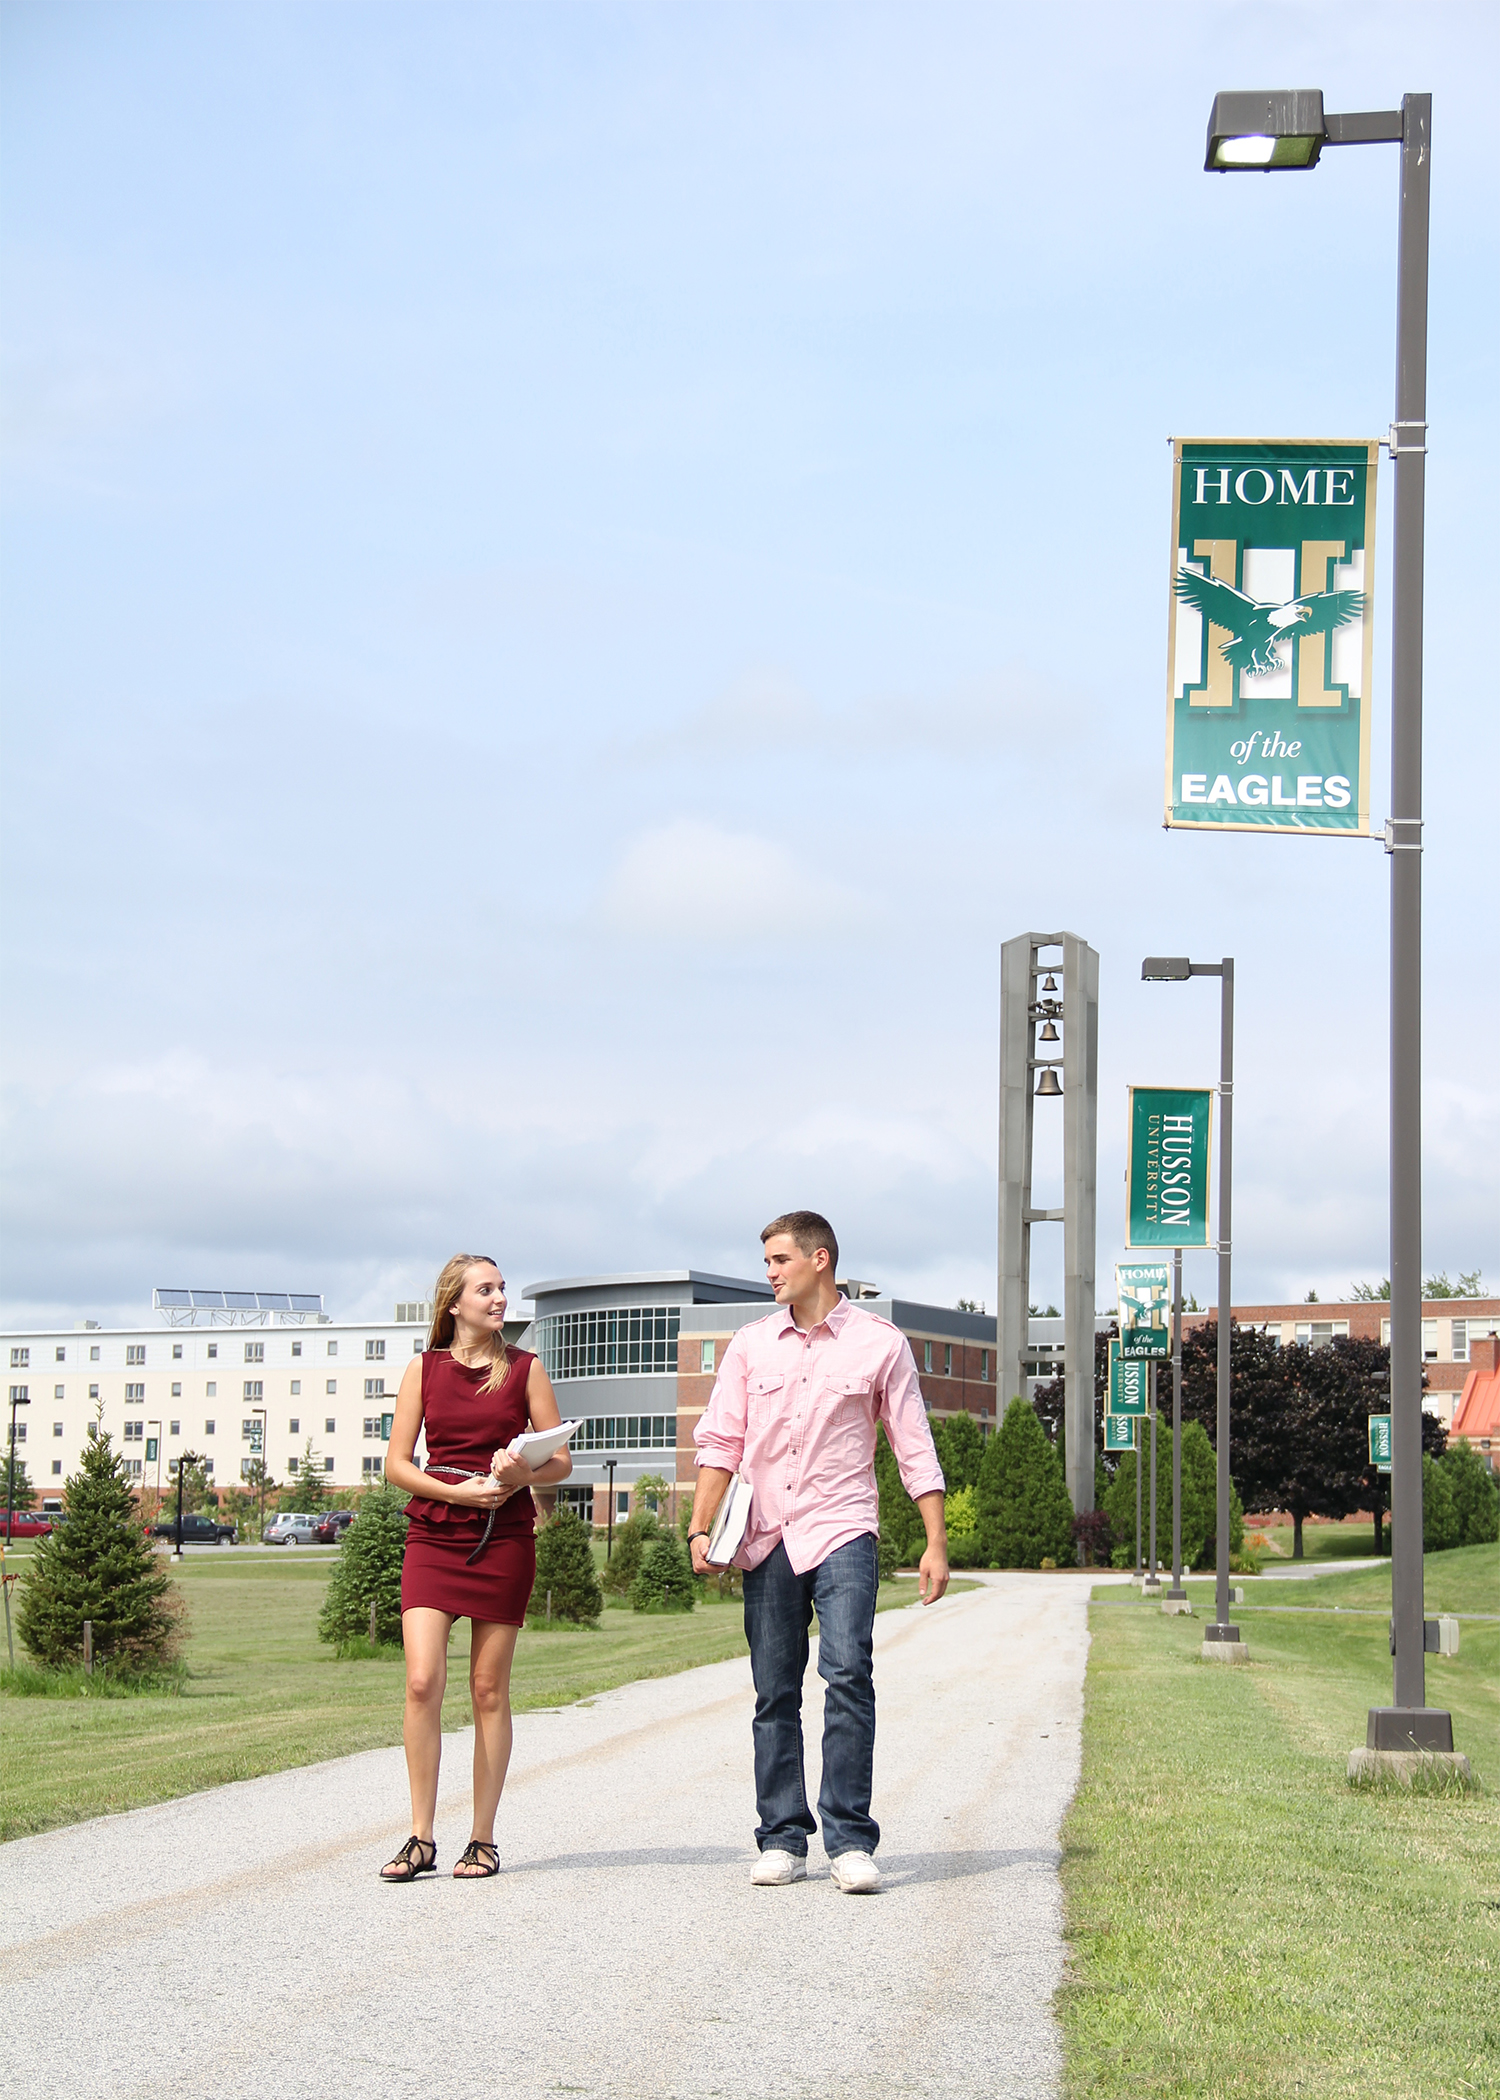 Husson University has a beautiful 208-acre campus in Bangor, Maine